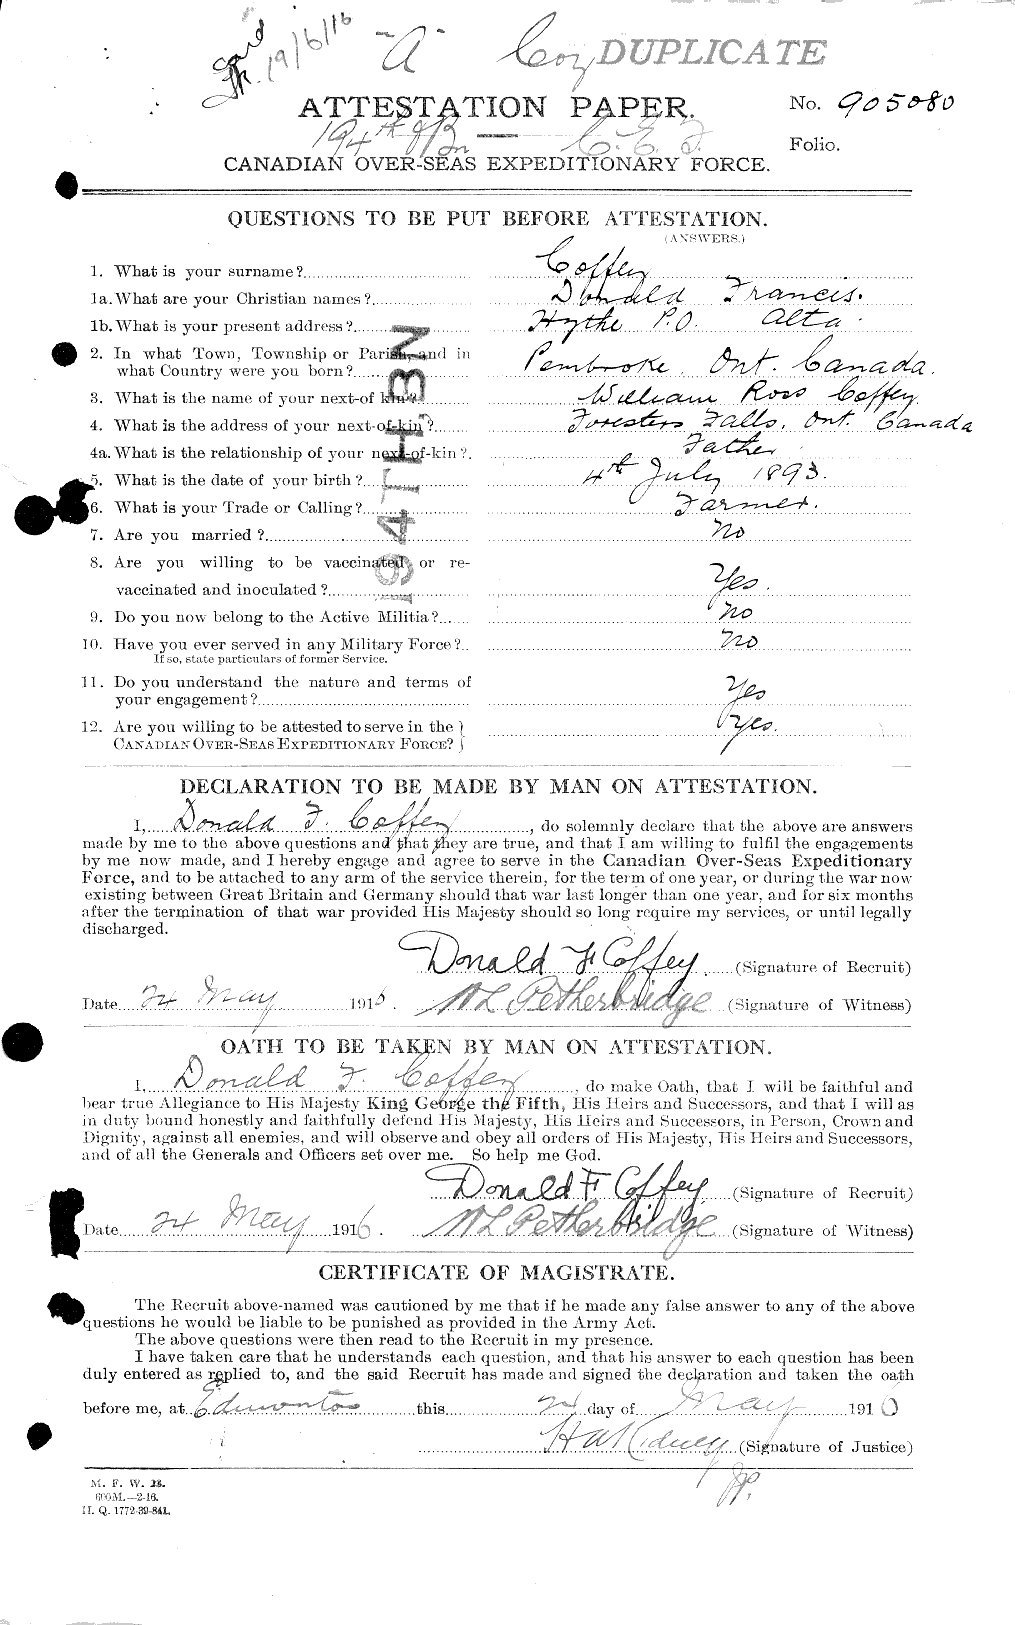 Personnel Records of the First World War - CEF 027011a